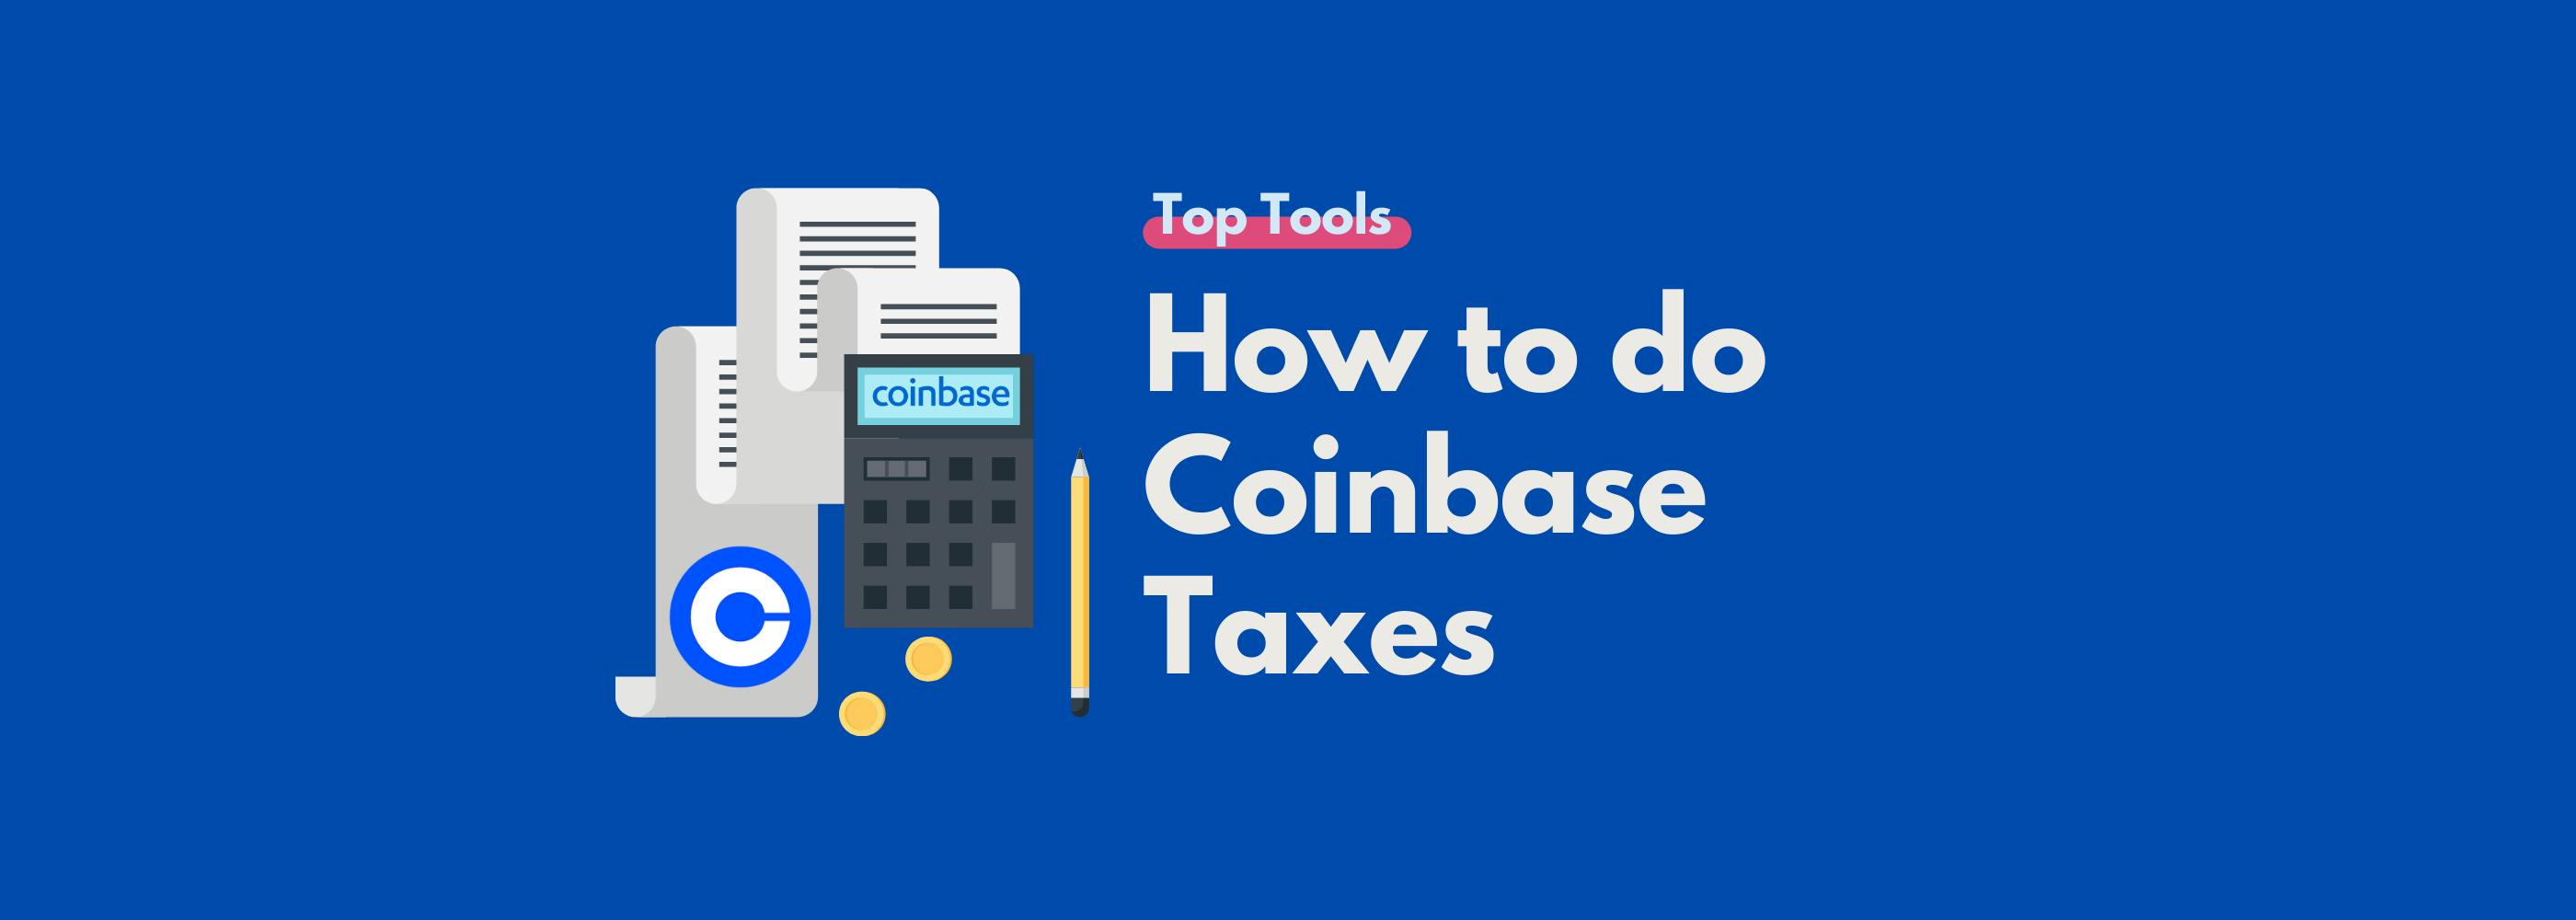 is converting crypto a taxable event coinbase